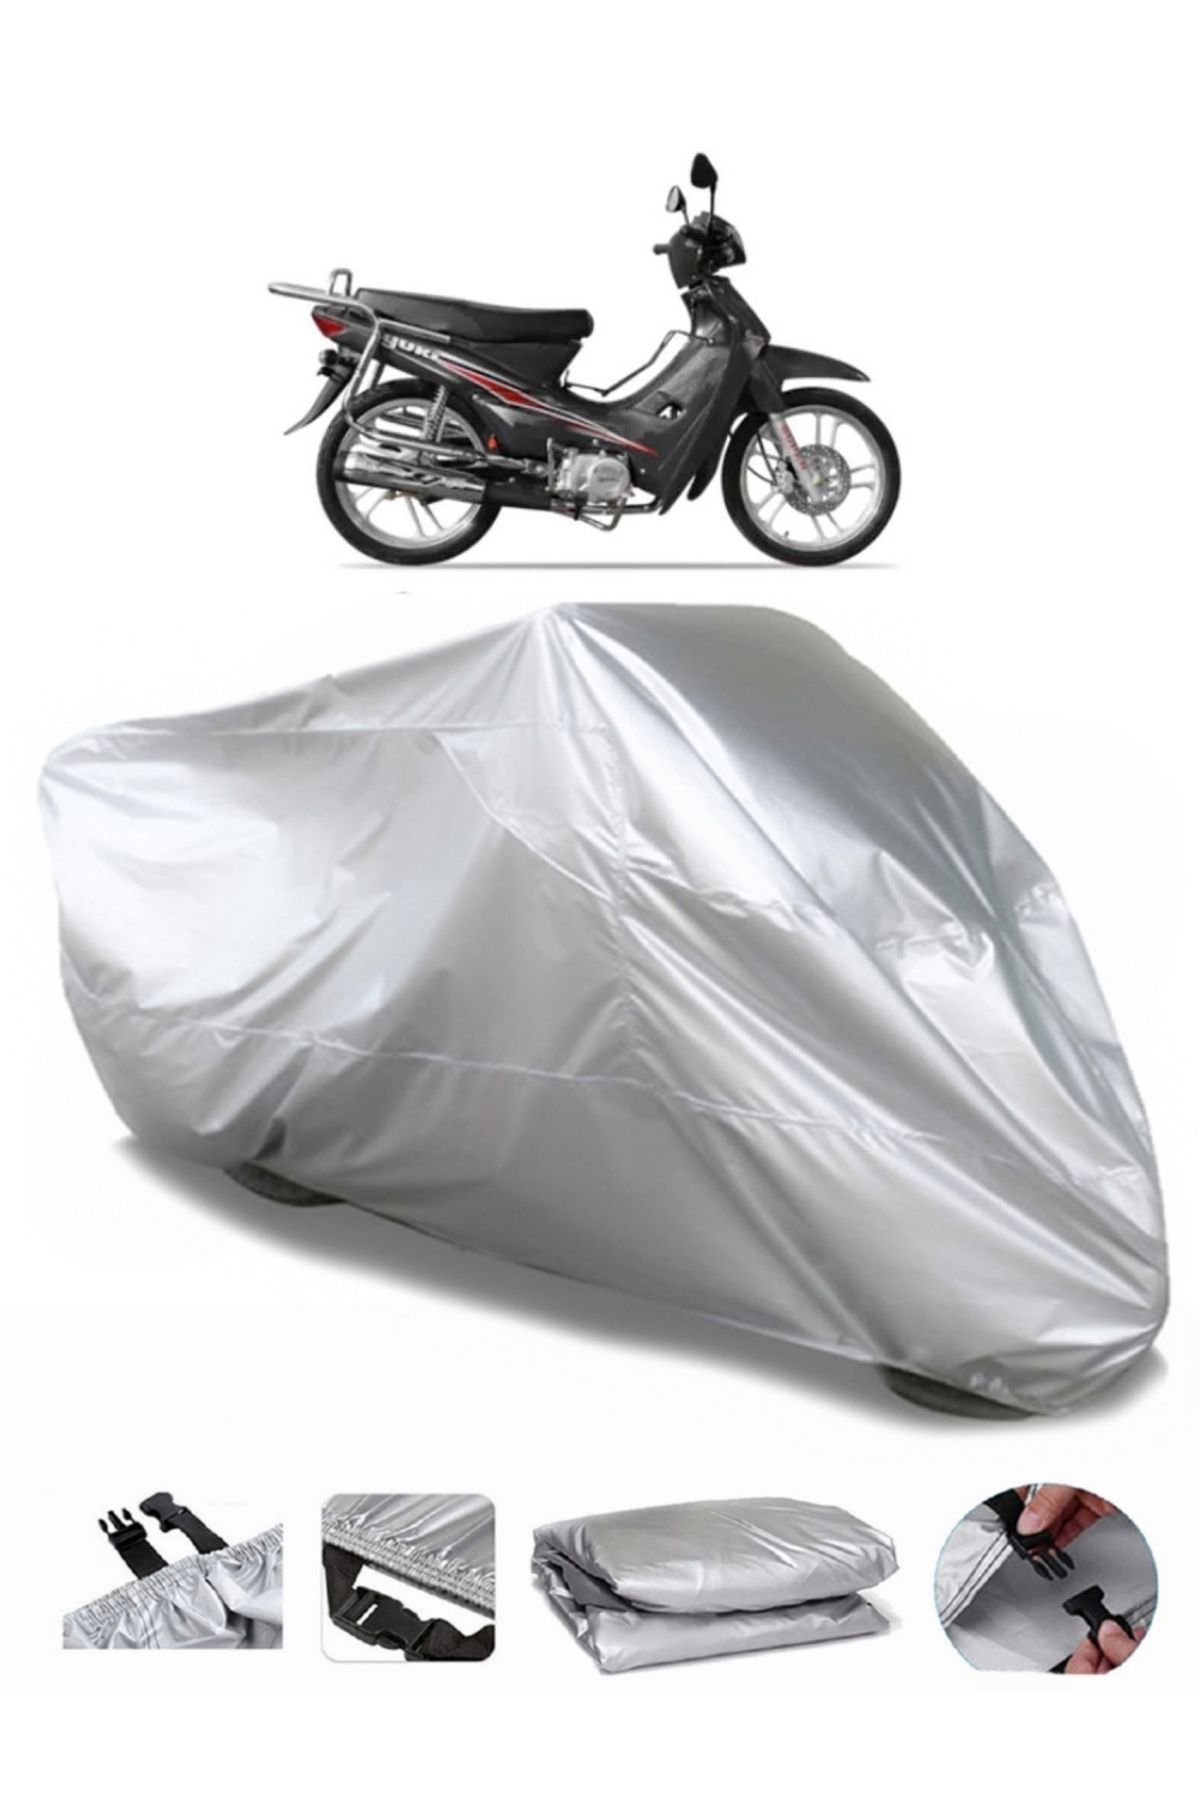 CoverPlus Yuki Gusto 50 Motorcycle Cover Outdoor Uv Protector Rain Covers